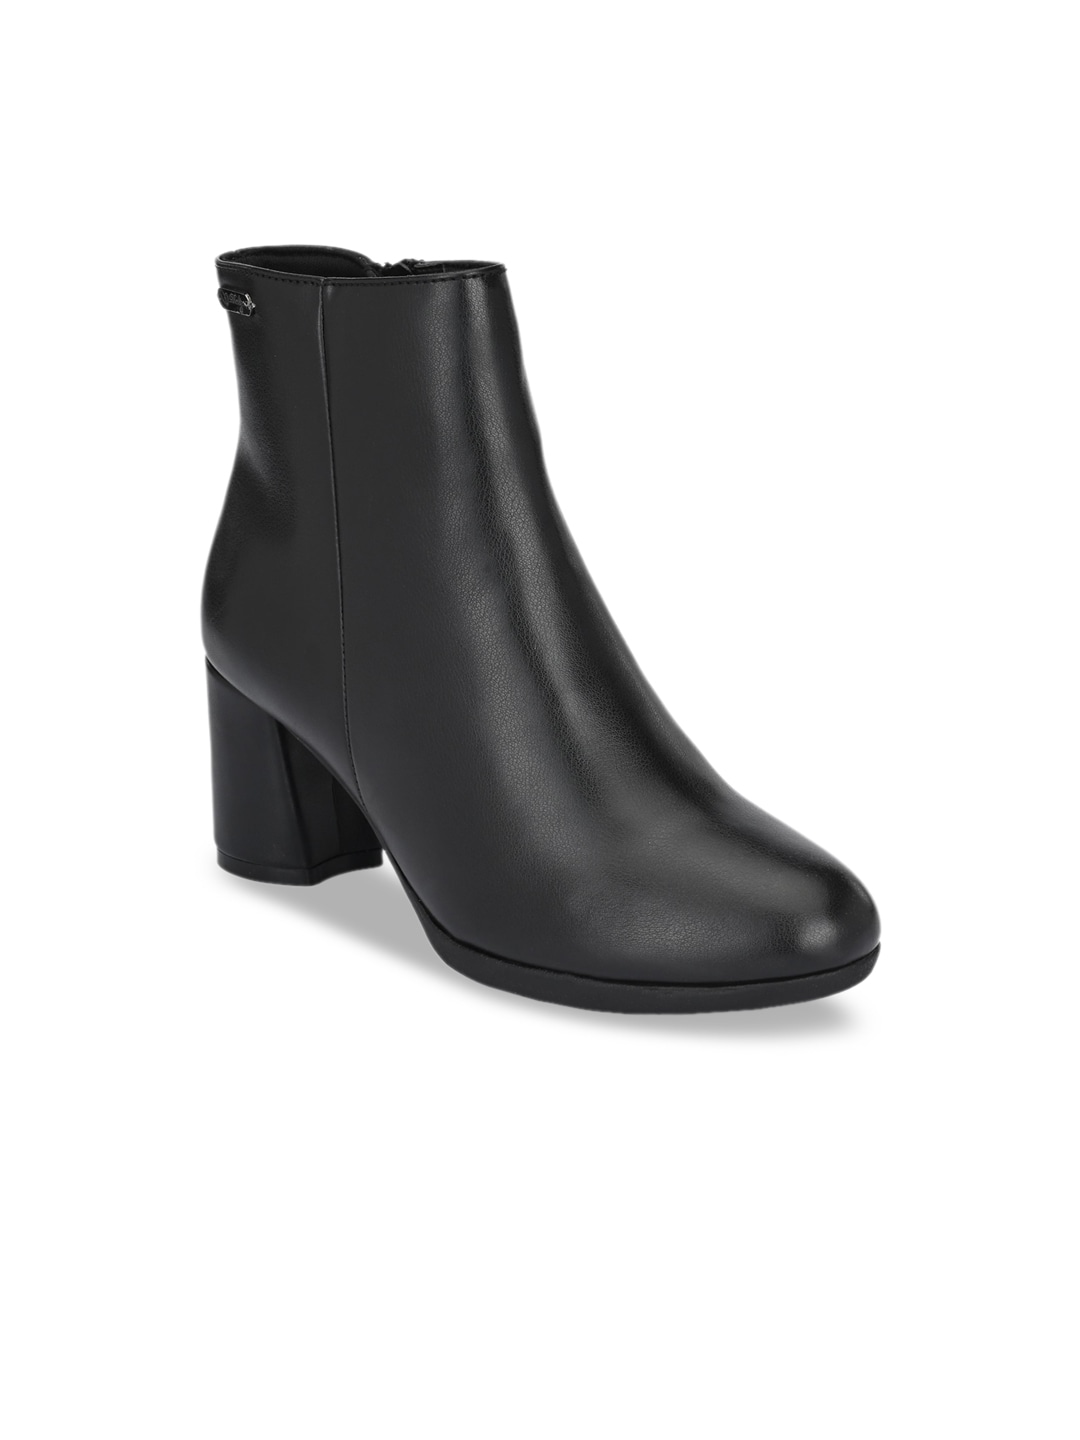 Delize Women Black Party Block Heeled Boots Price in India